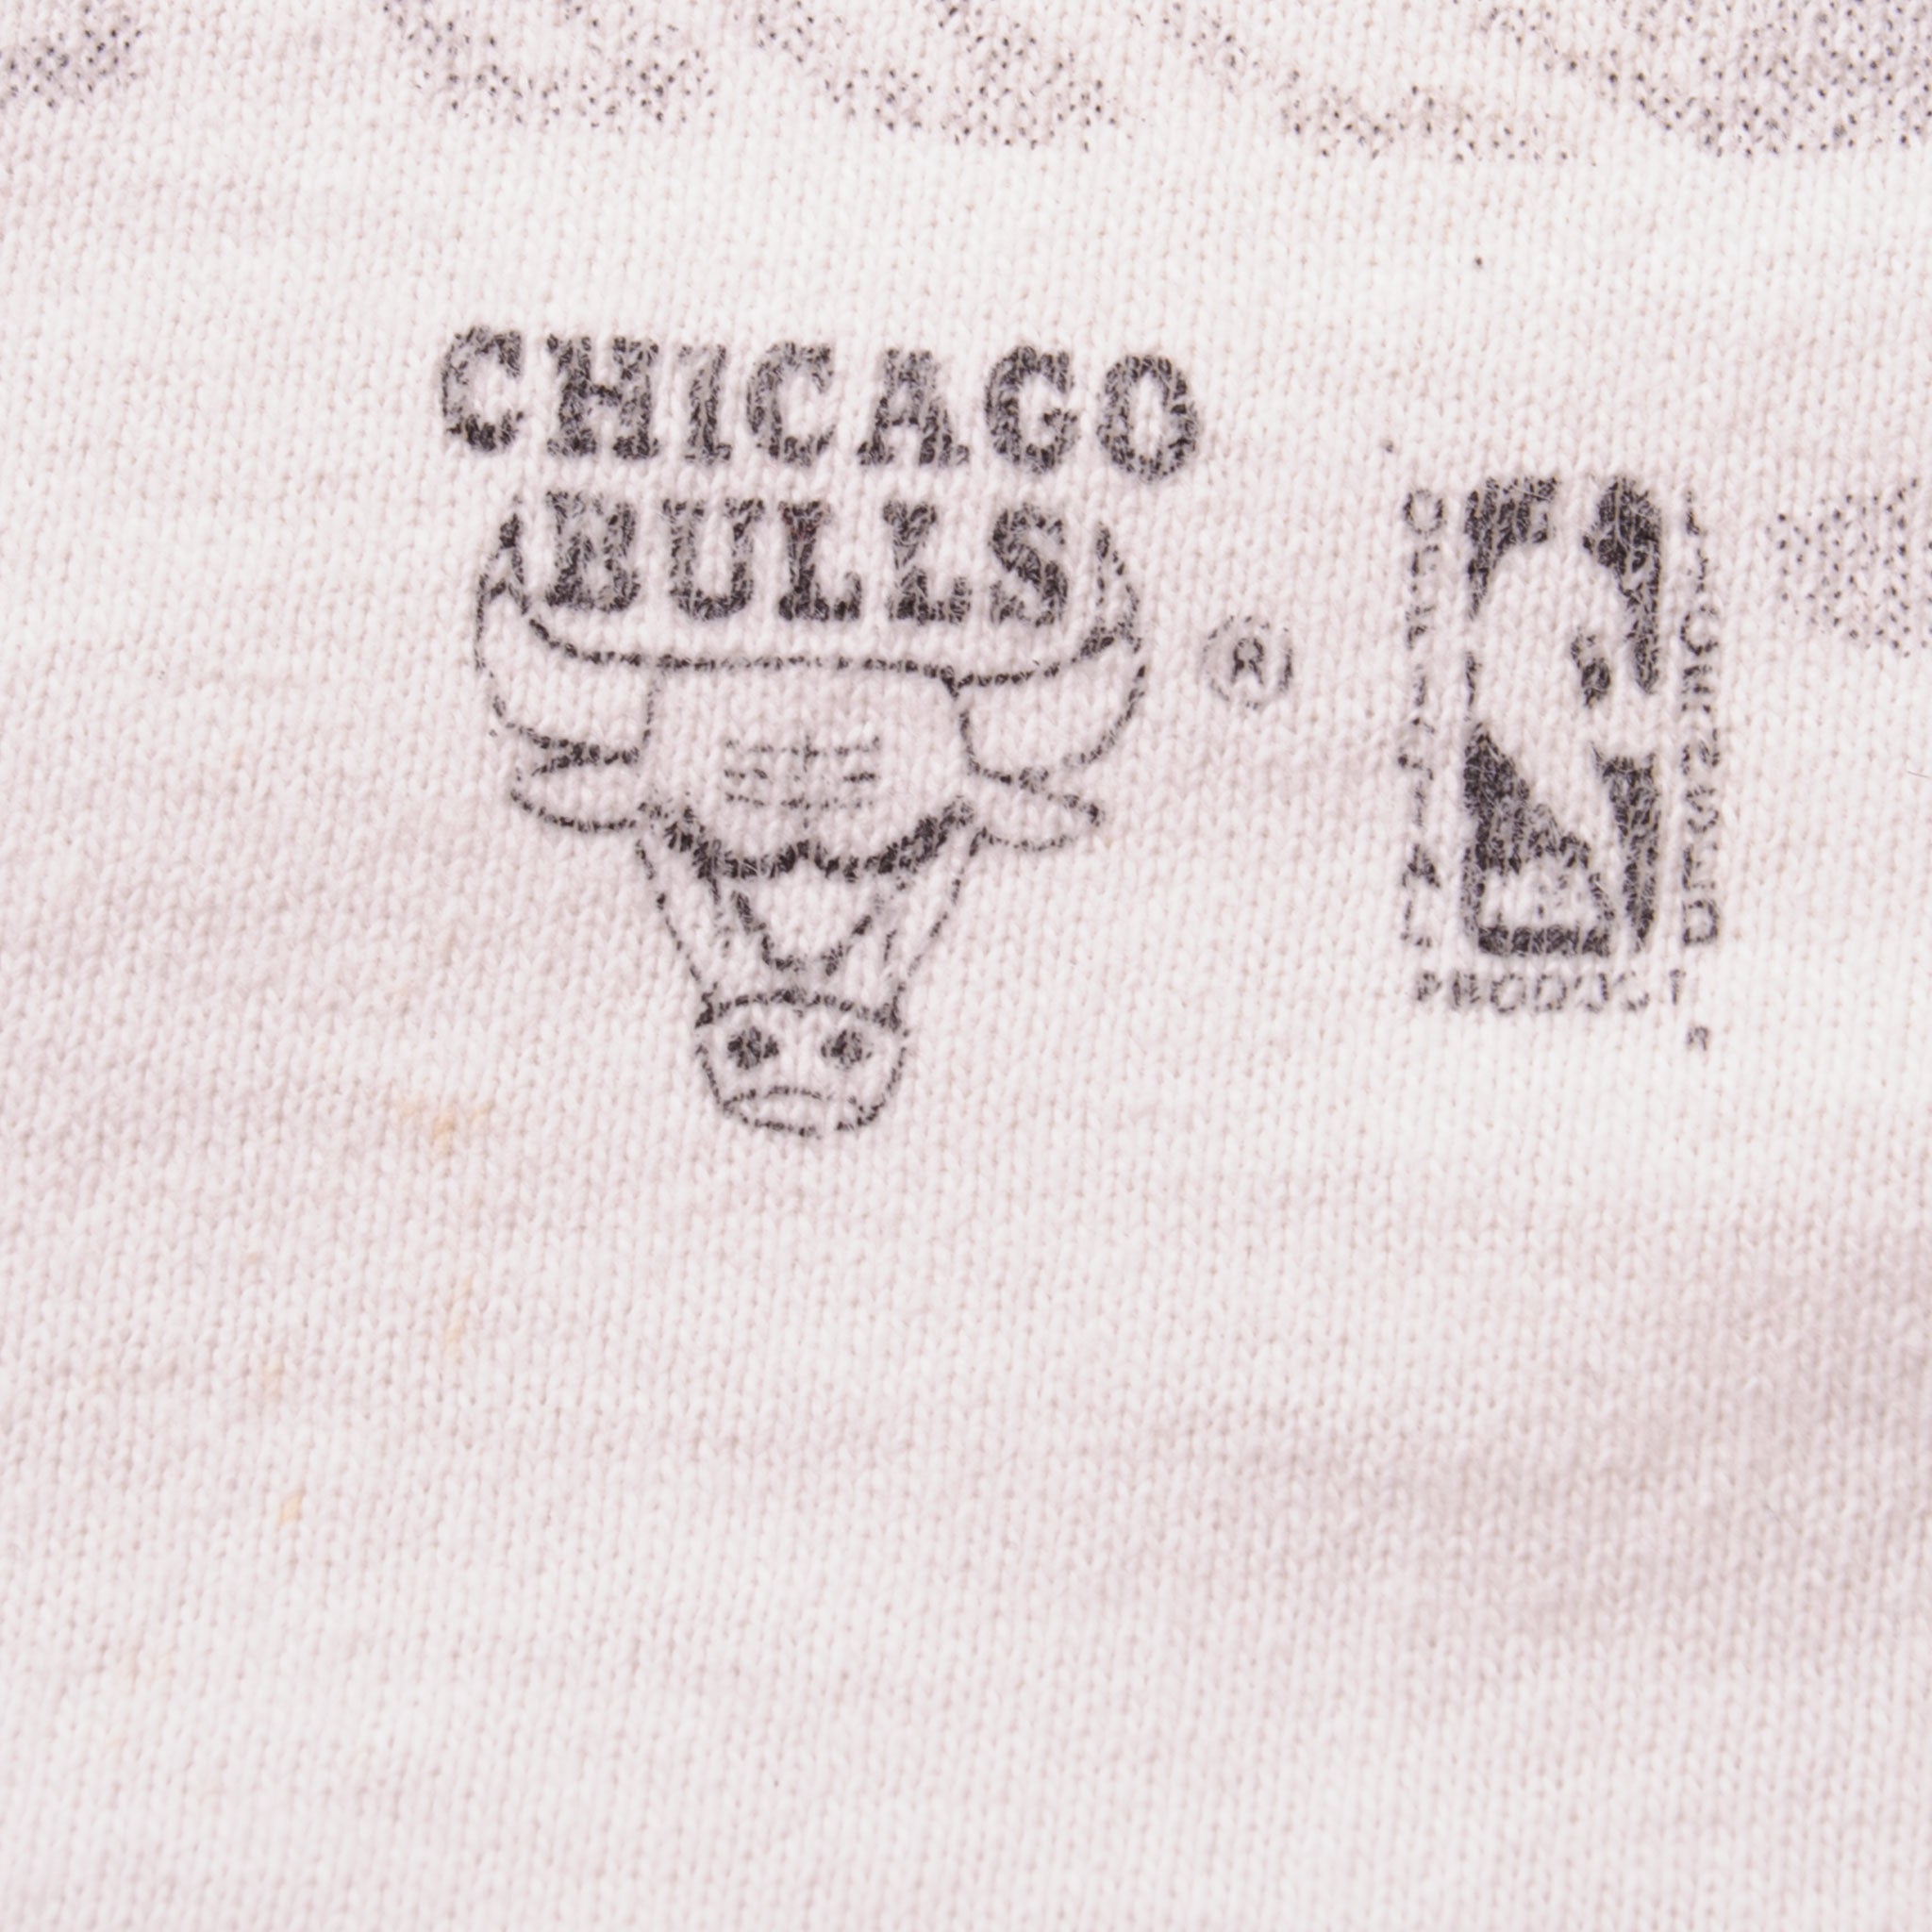 Vintage Chicago Bulls 1991 NBA Finals Shirt Size X-Large – Yesterday's Attic